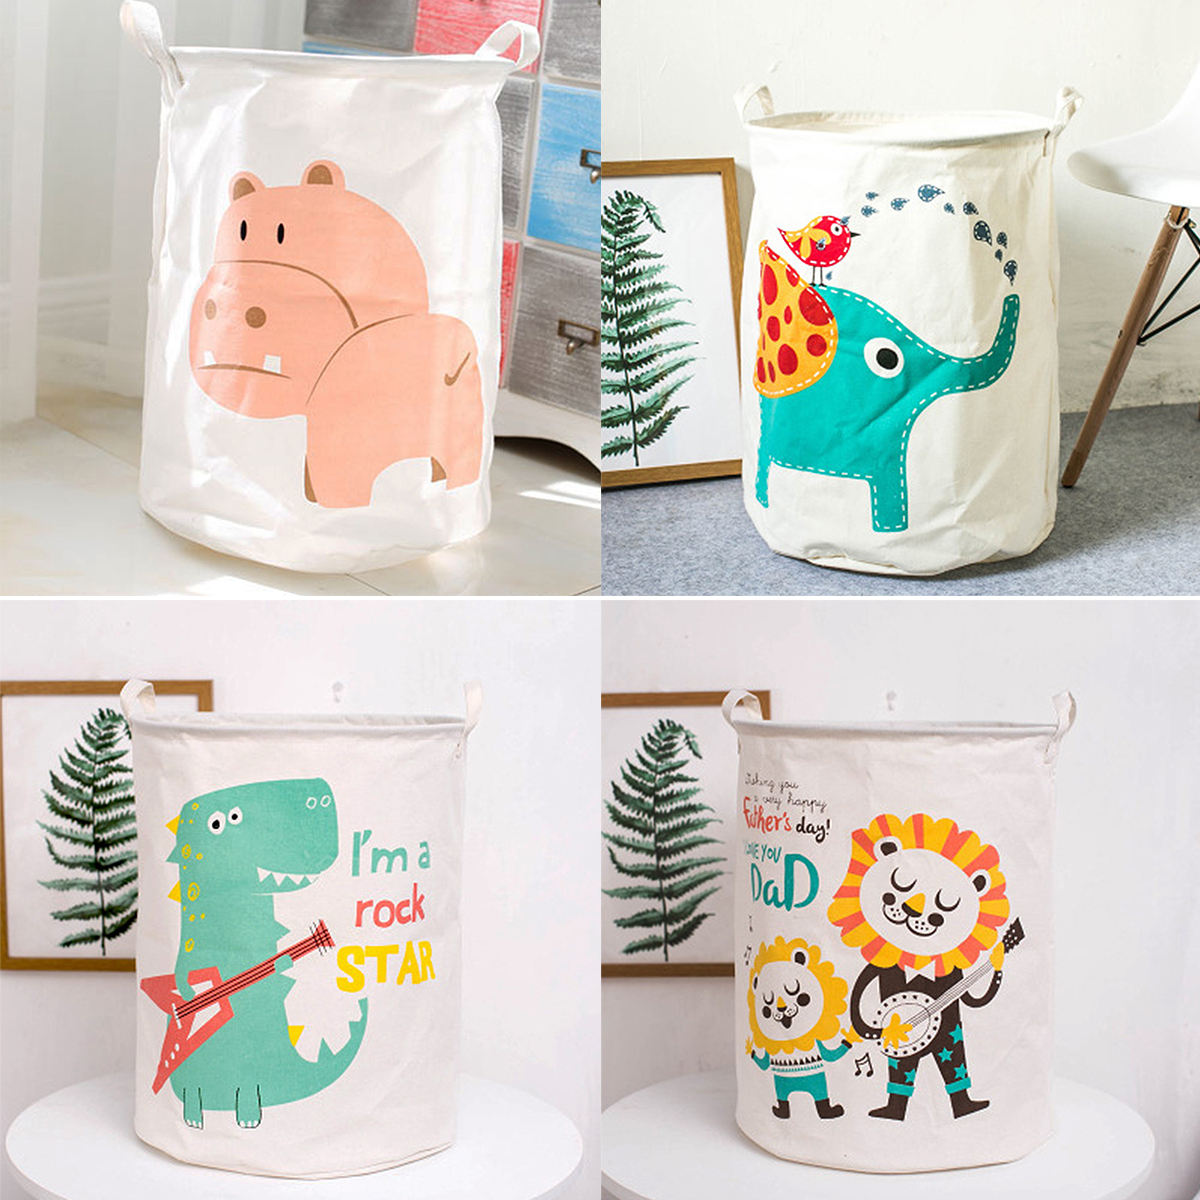 Cartoon-Animals-Cloth-Laundry-Basket-Storage-Bag-Laundry-Clothes-Organizer-Pack-Toy-Artifacts-1690768-1